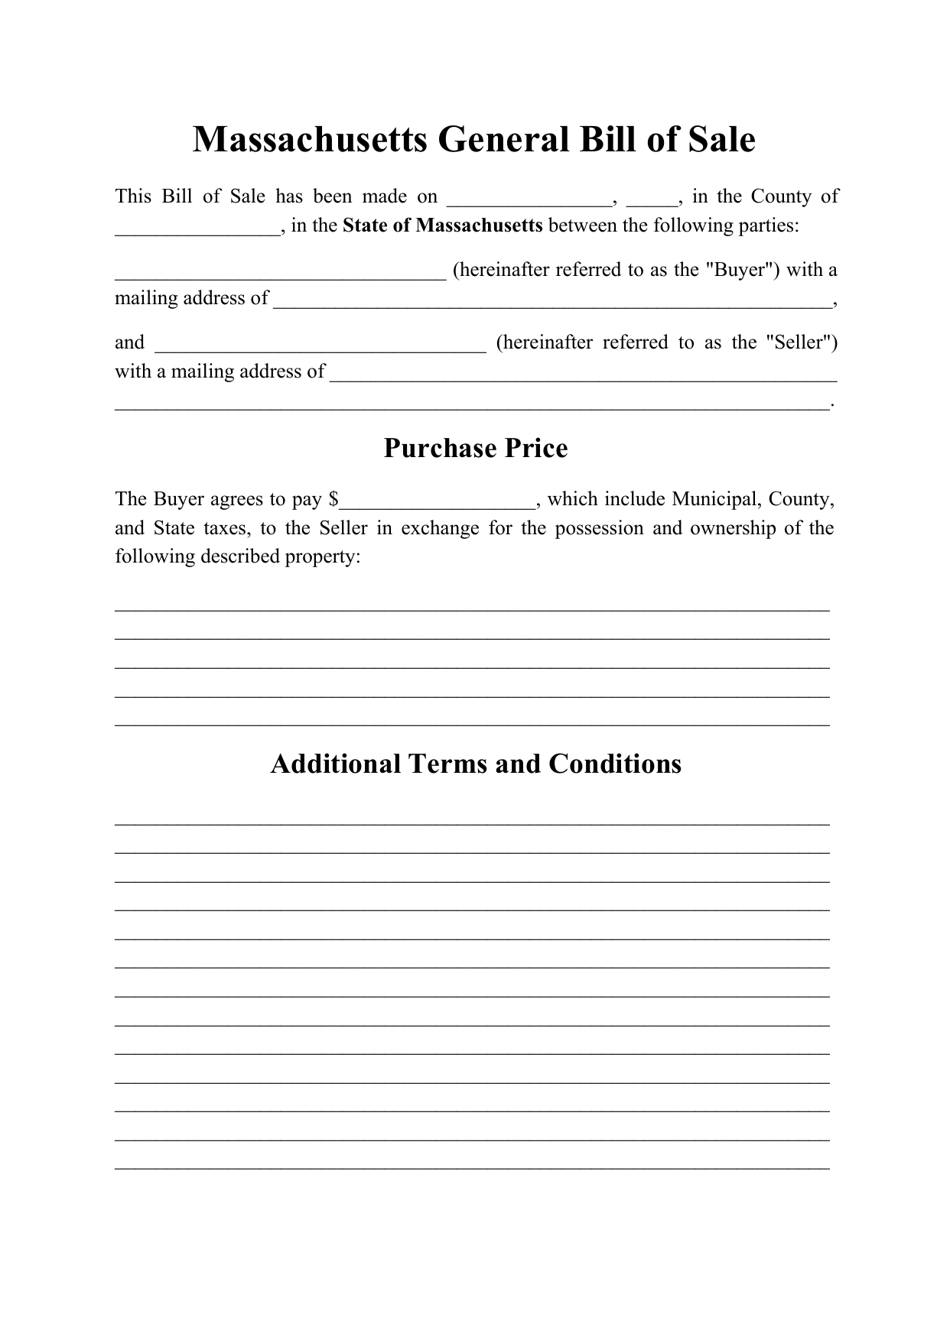 Generic Bill of Sale Form - Massachusetts, Page 1